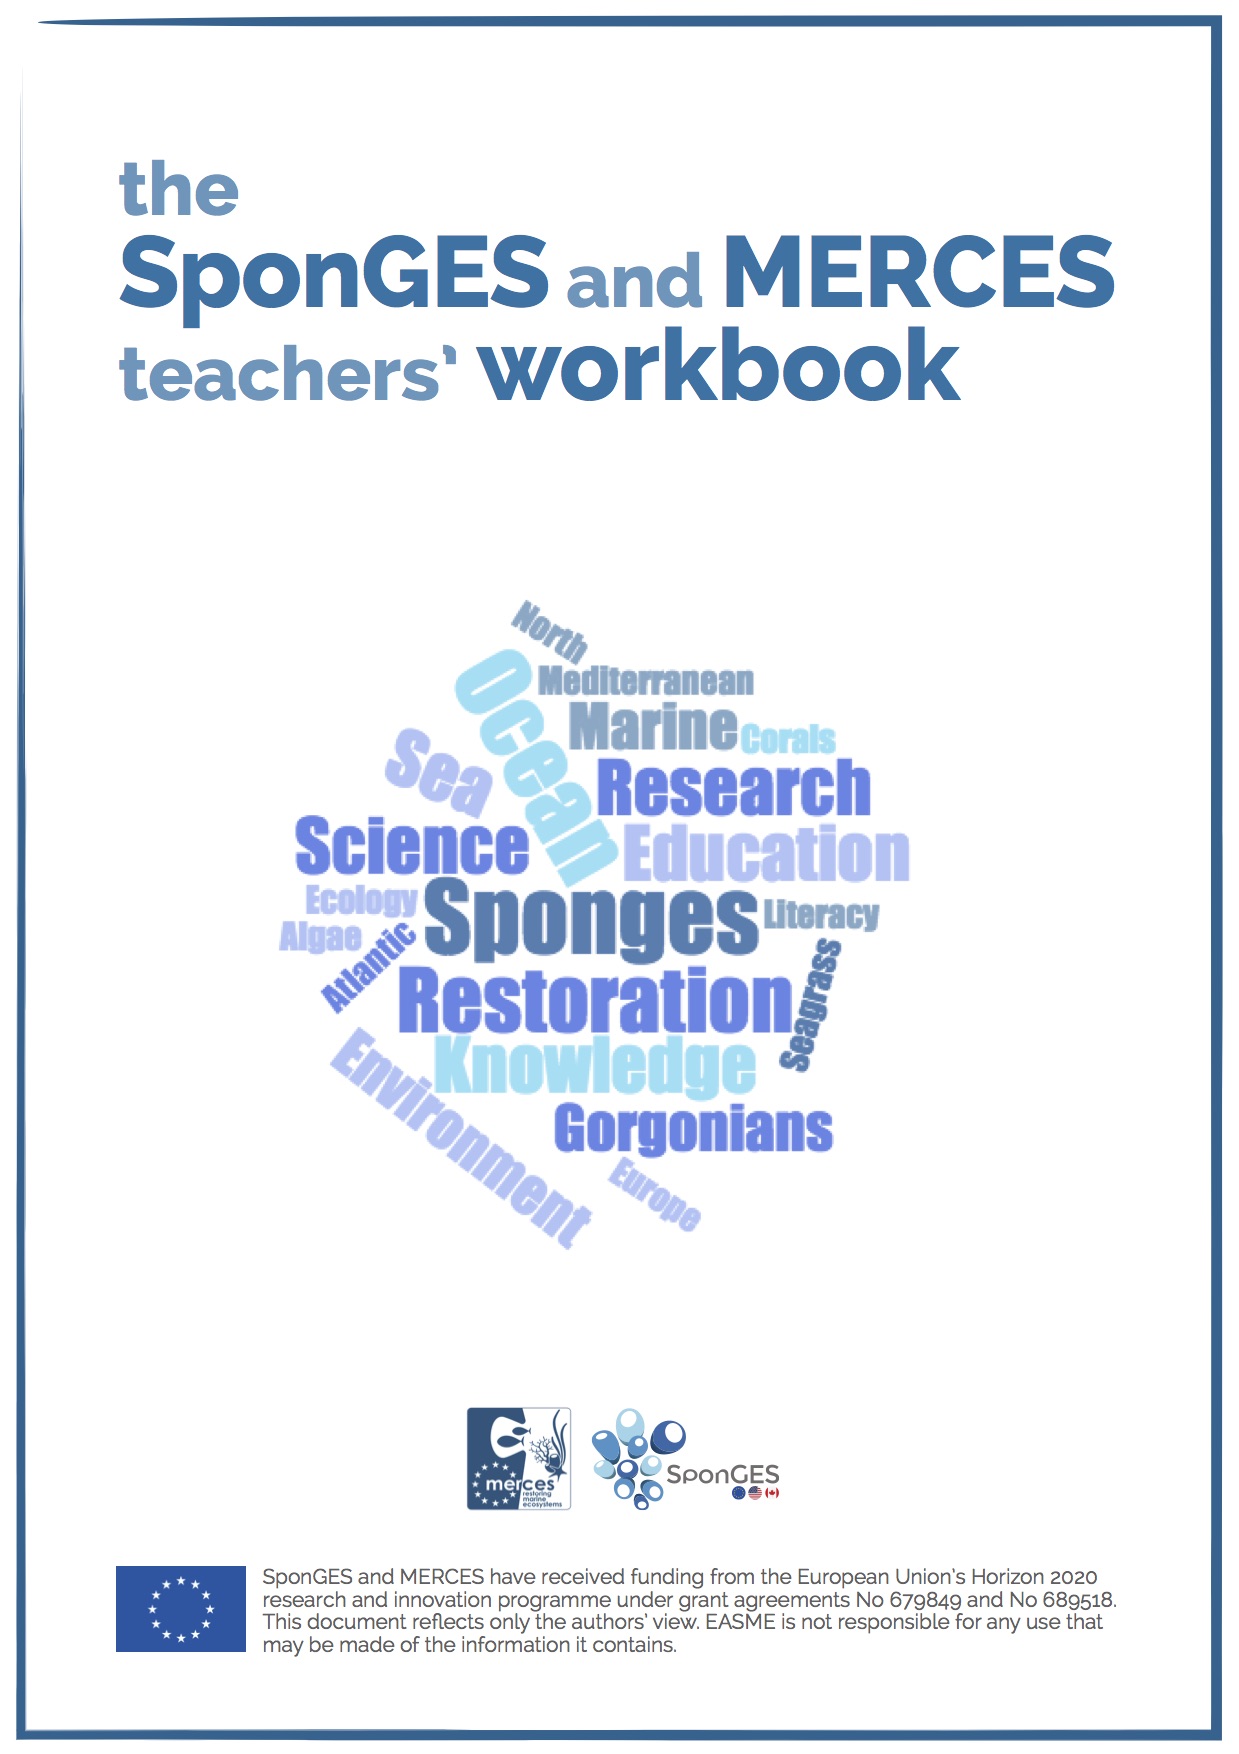 Cover of the SponGES and MERCES teachers' workbook